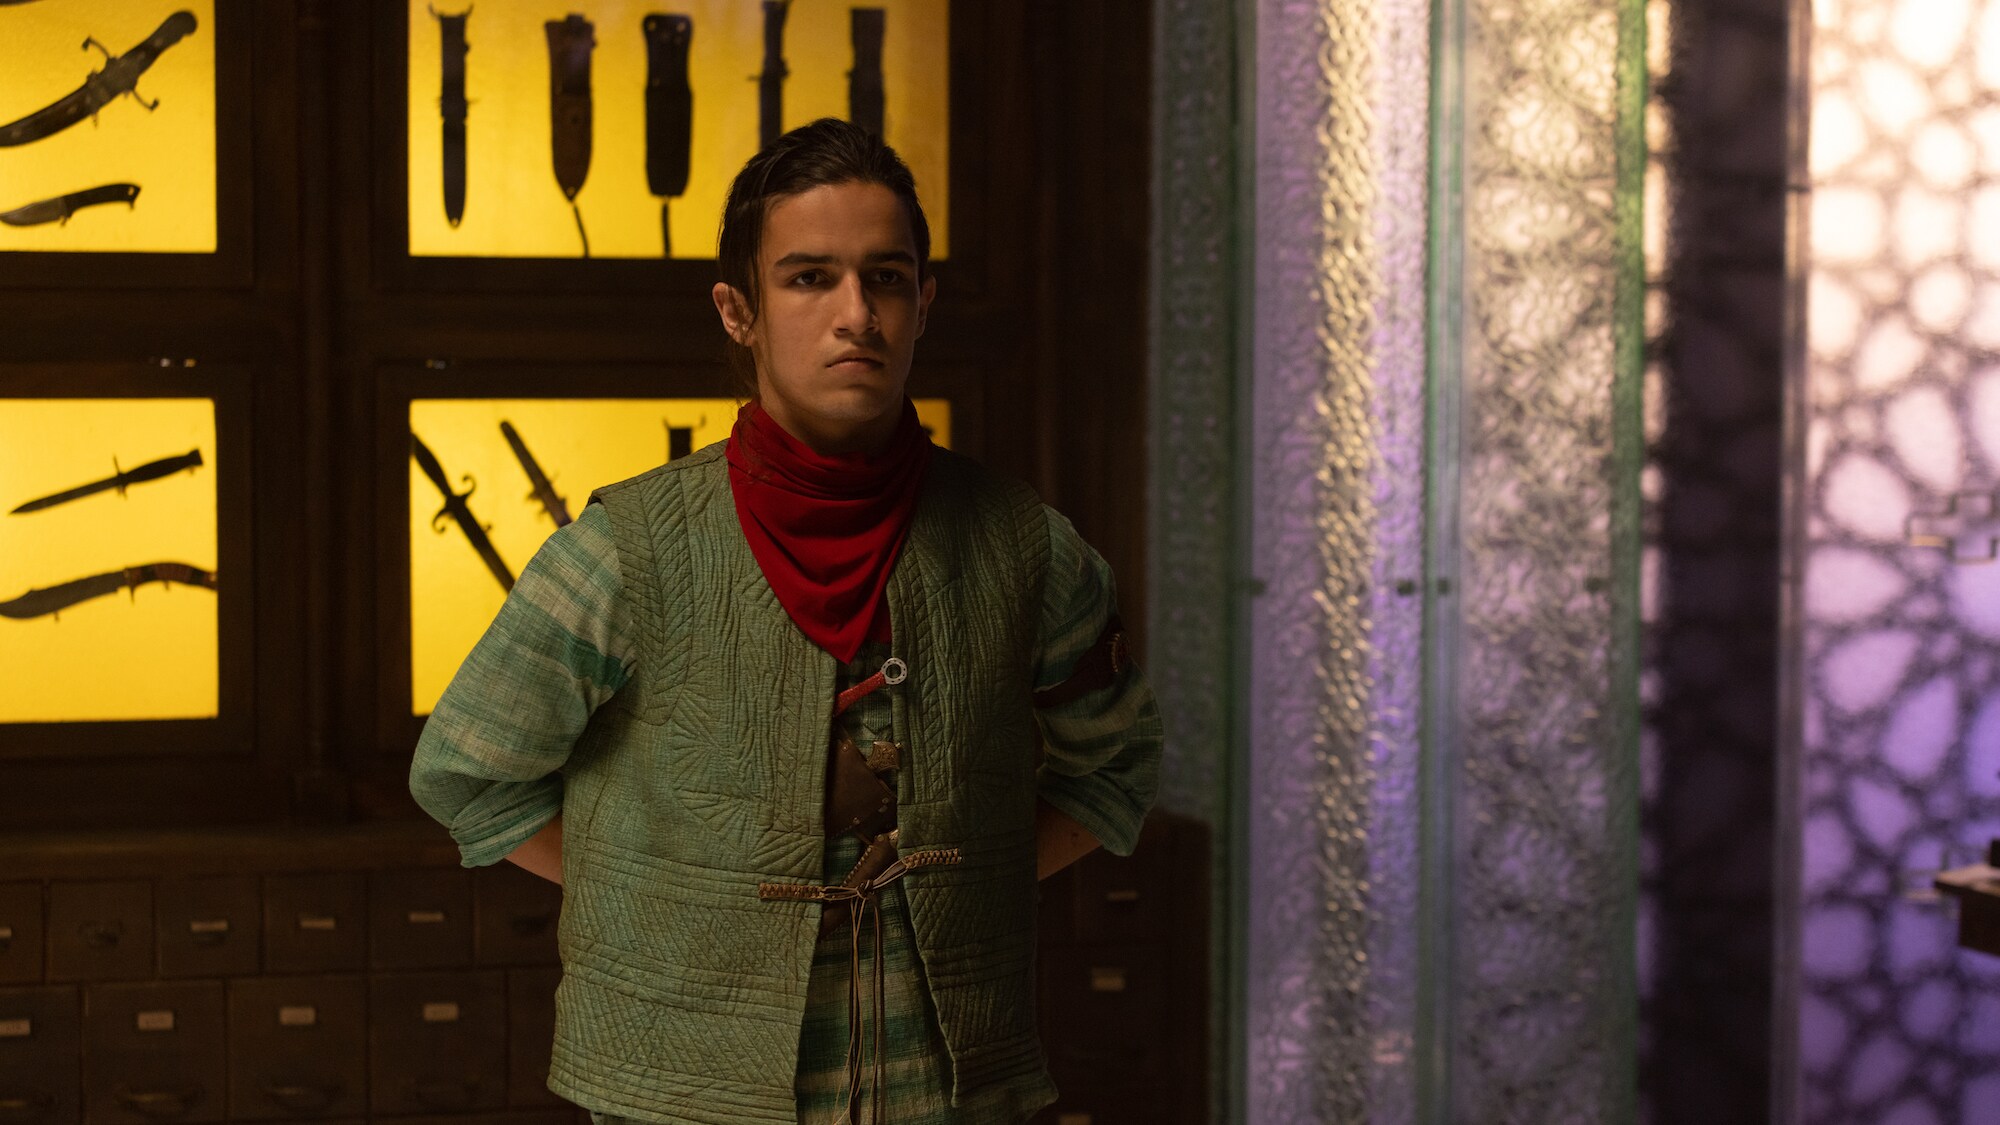 Aramis Knight as Red Dagger/Kareem in Marvel Studios' MS. MARVEL, exclusively on Disney+. Photo by Patrick Brown. ©Marvel Studios 2022. All Rights Reserved.